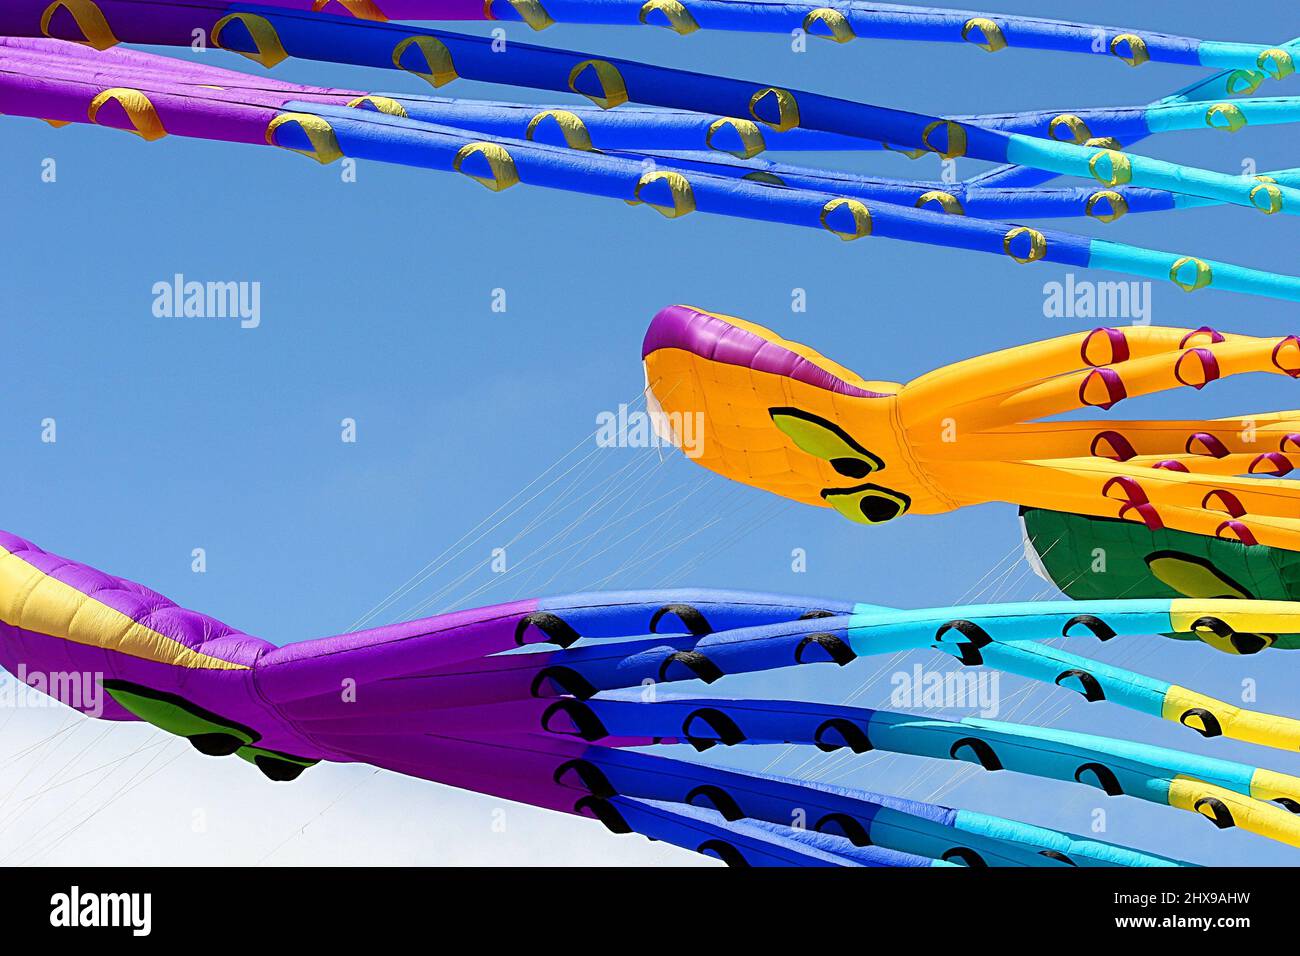 Airborne Colorful Kites with Long Appendages During Berkeley, CA Kite Festival Stock Photo